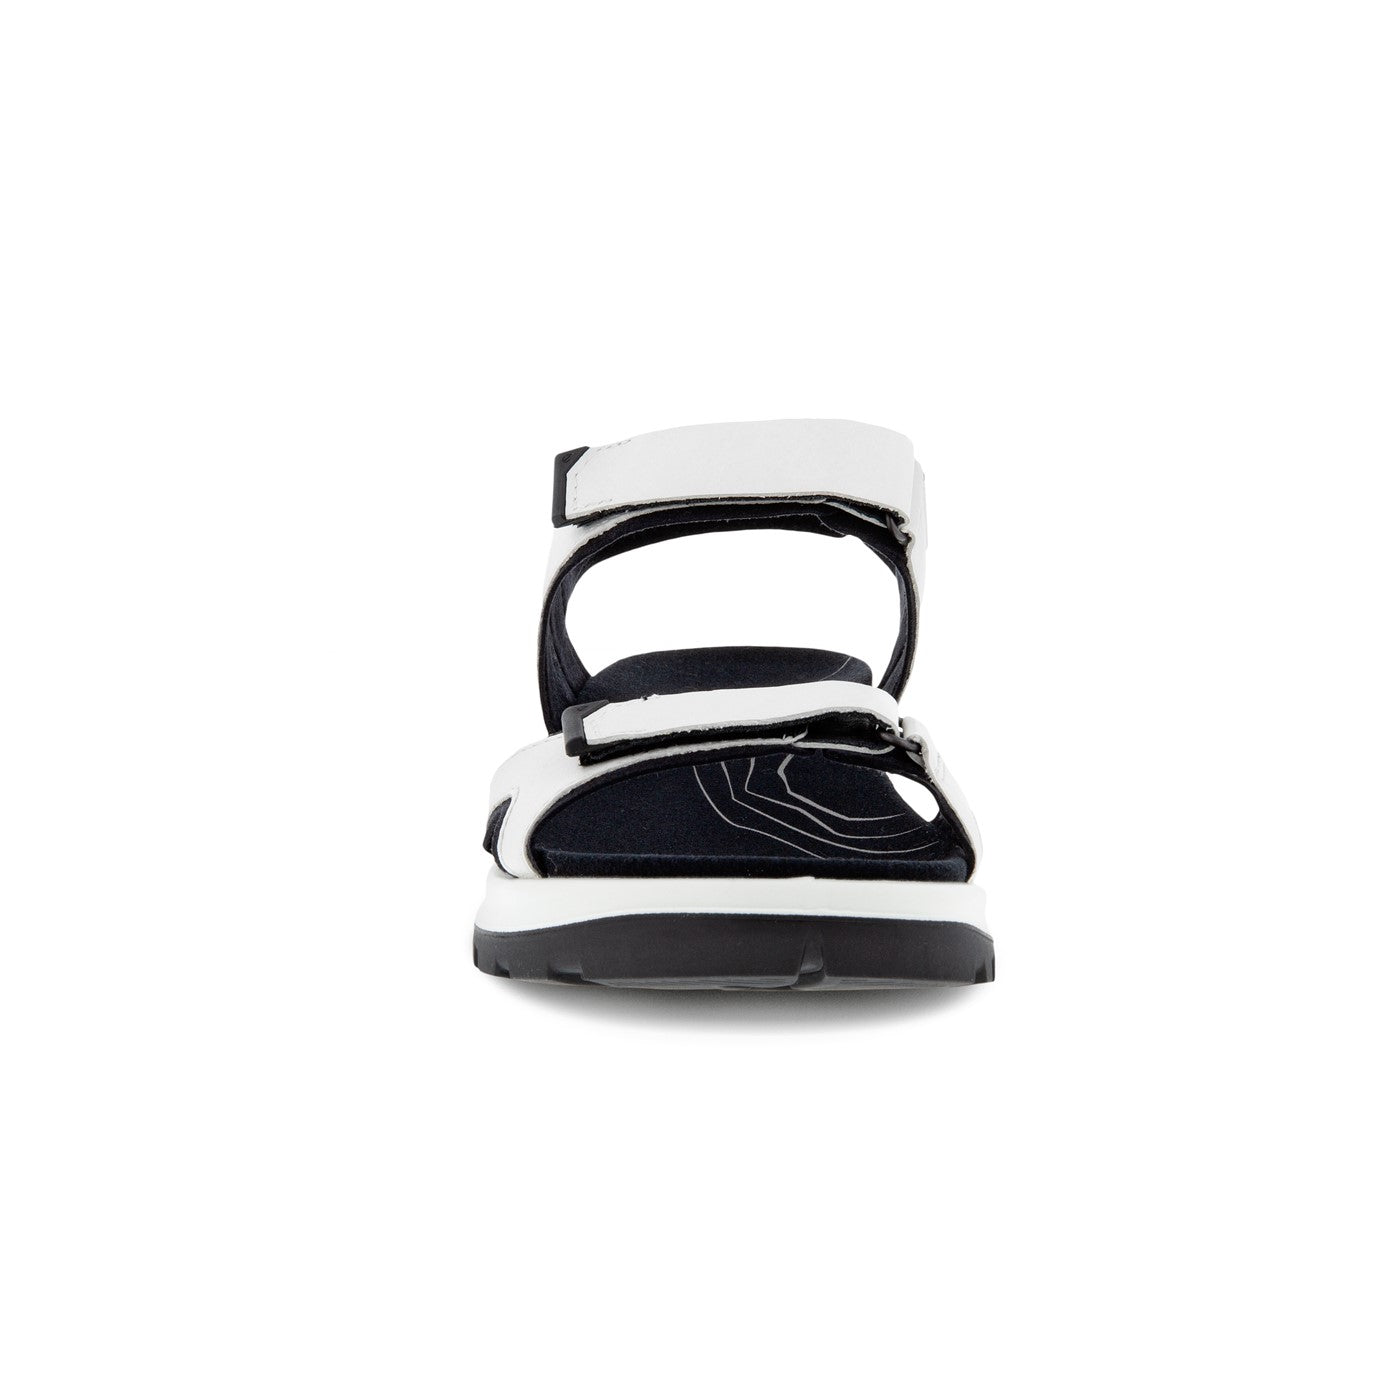 Ecco Offroad White - Women Sandals - Collective Shoes 